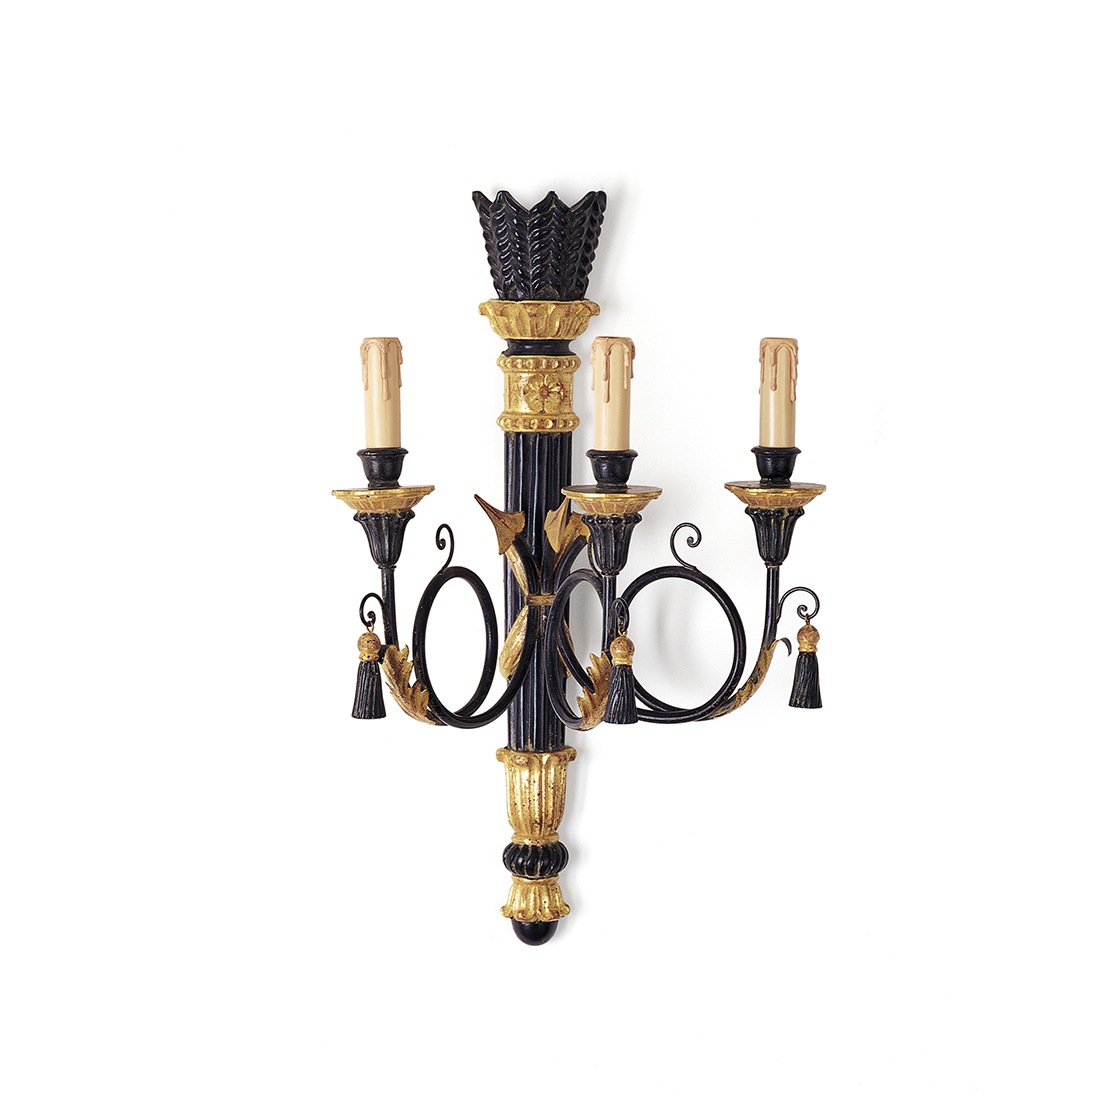 Athena wall light in Black & gold - Beaumont & Fletcher